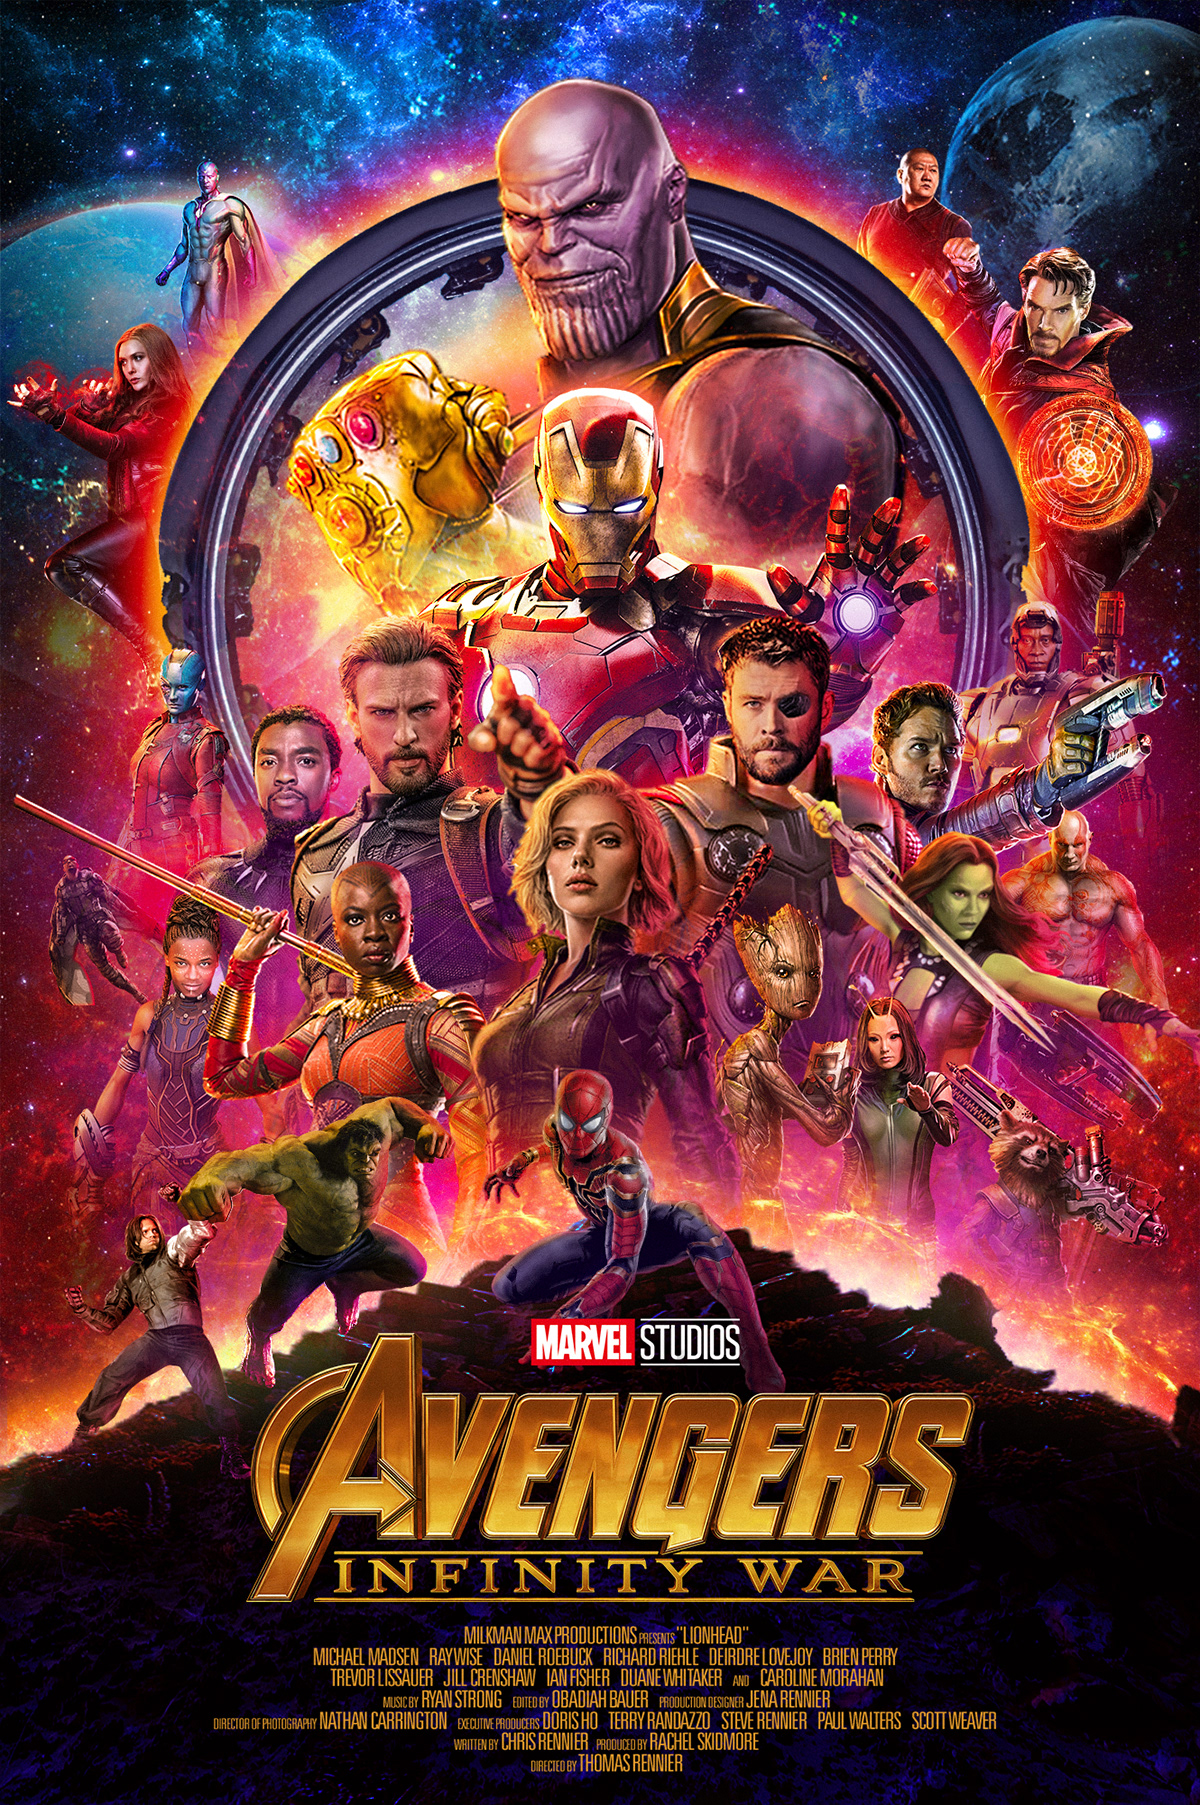 Avengers Infinity War Official Poster (Recreated) on Behance